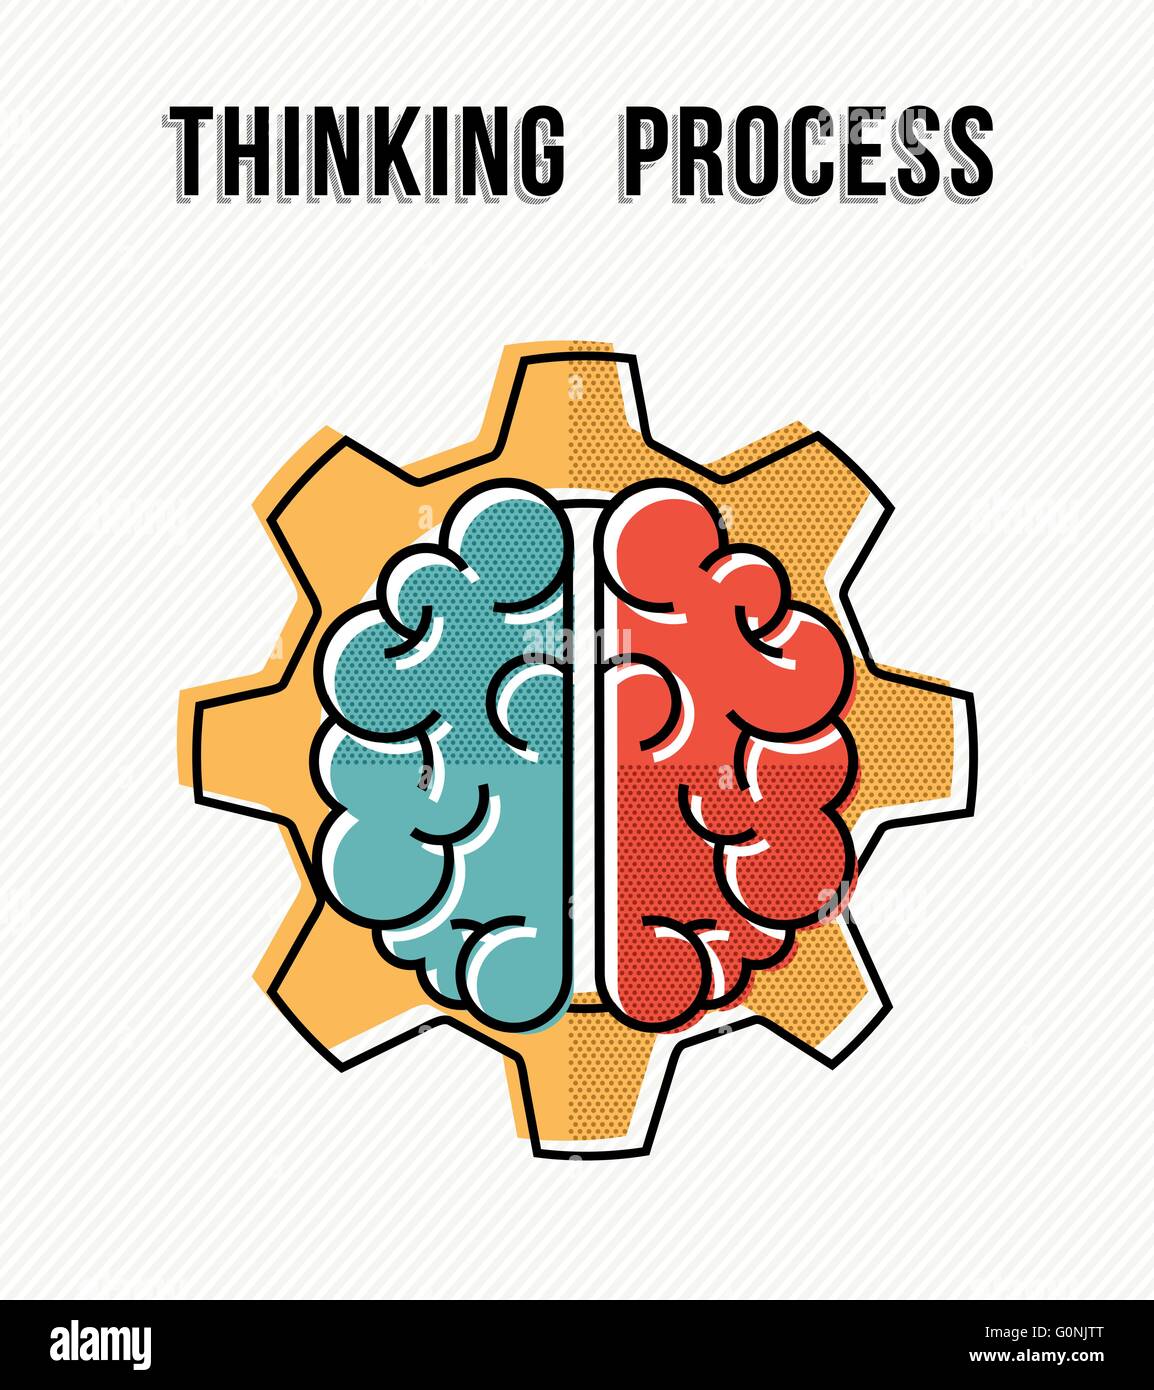 Thinking process concept illustration with human brain and gear wheel design, development of ideas in business. EPS10 vector. Stock Vector